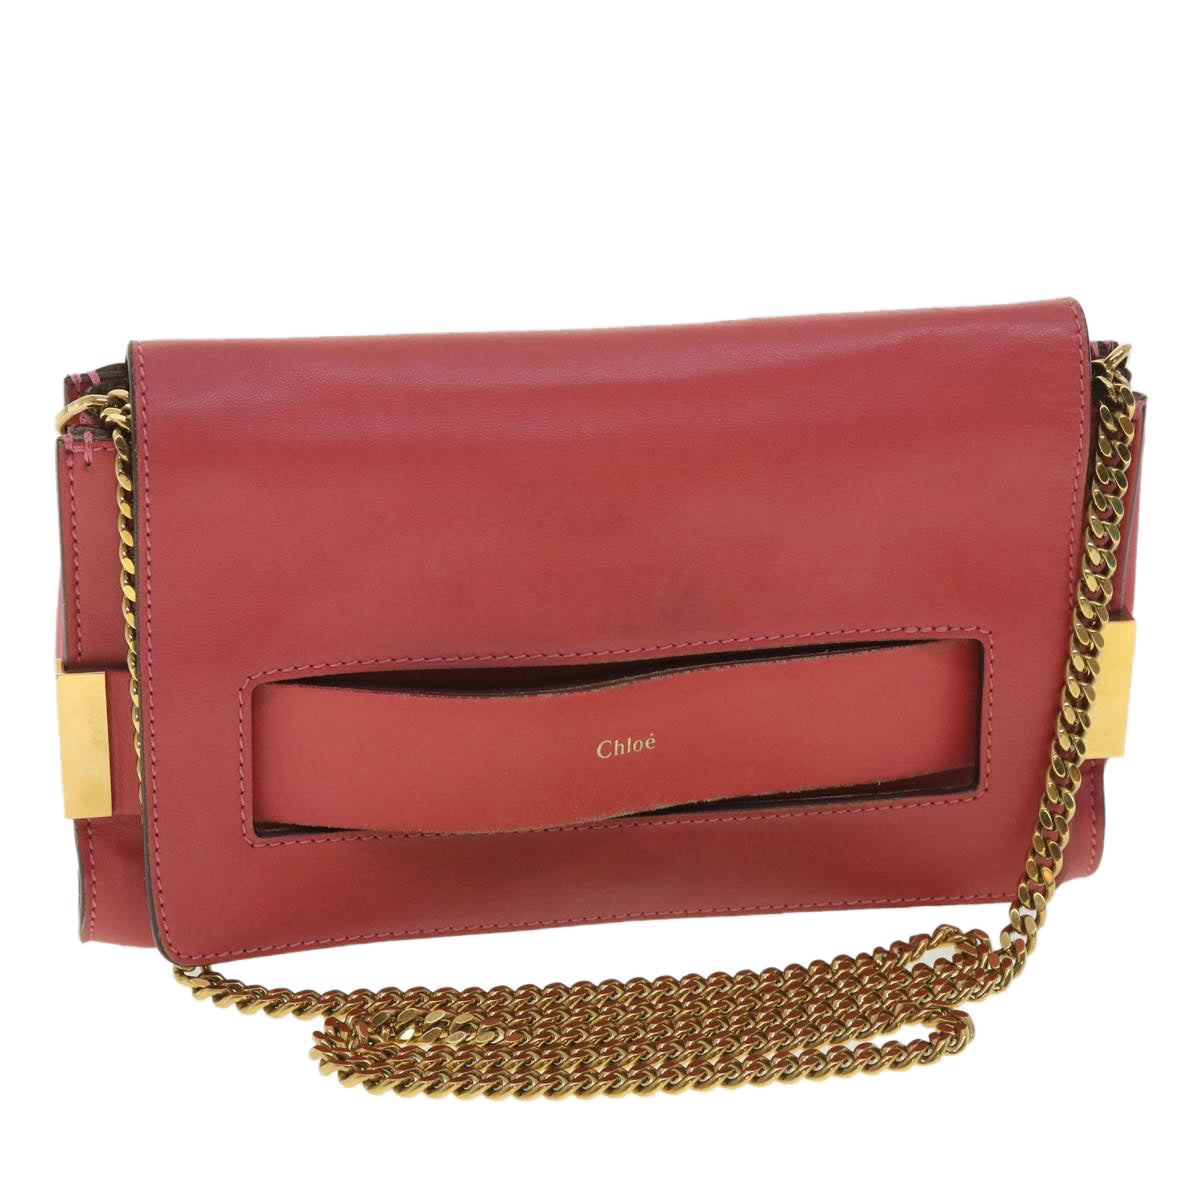 Chloe Chain Shoulder Bag Leather 2way Pink Auth yk6115